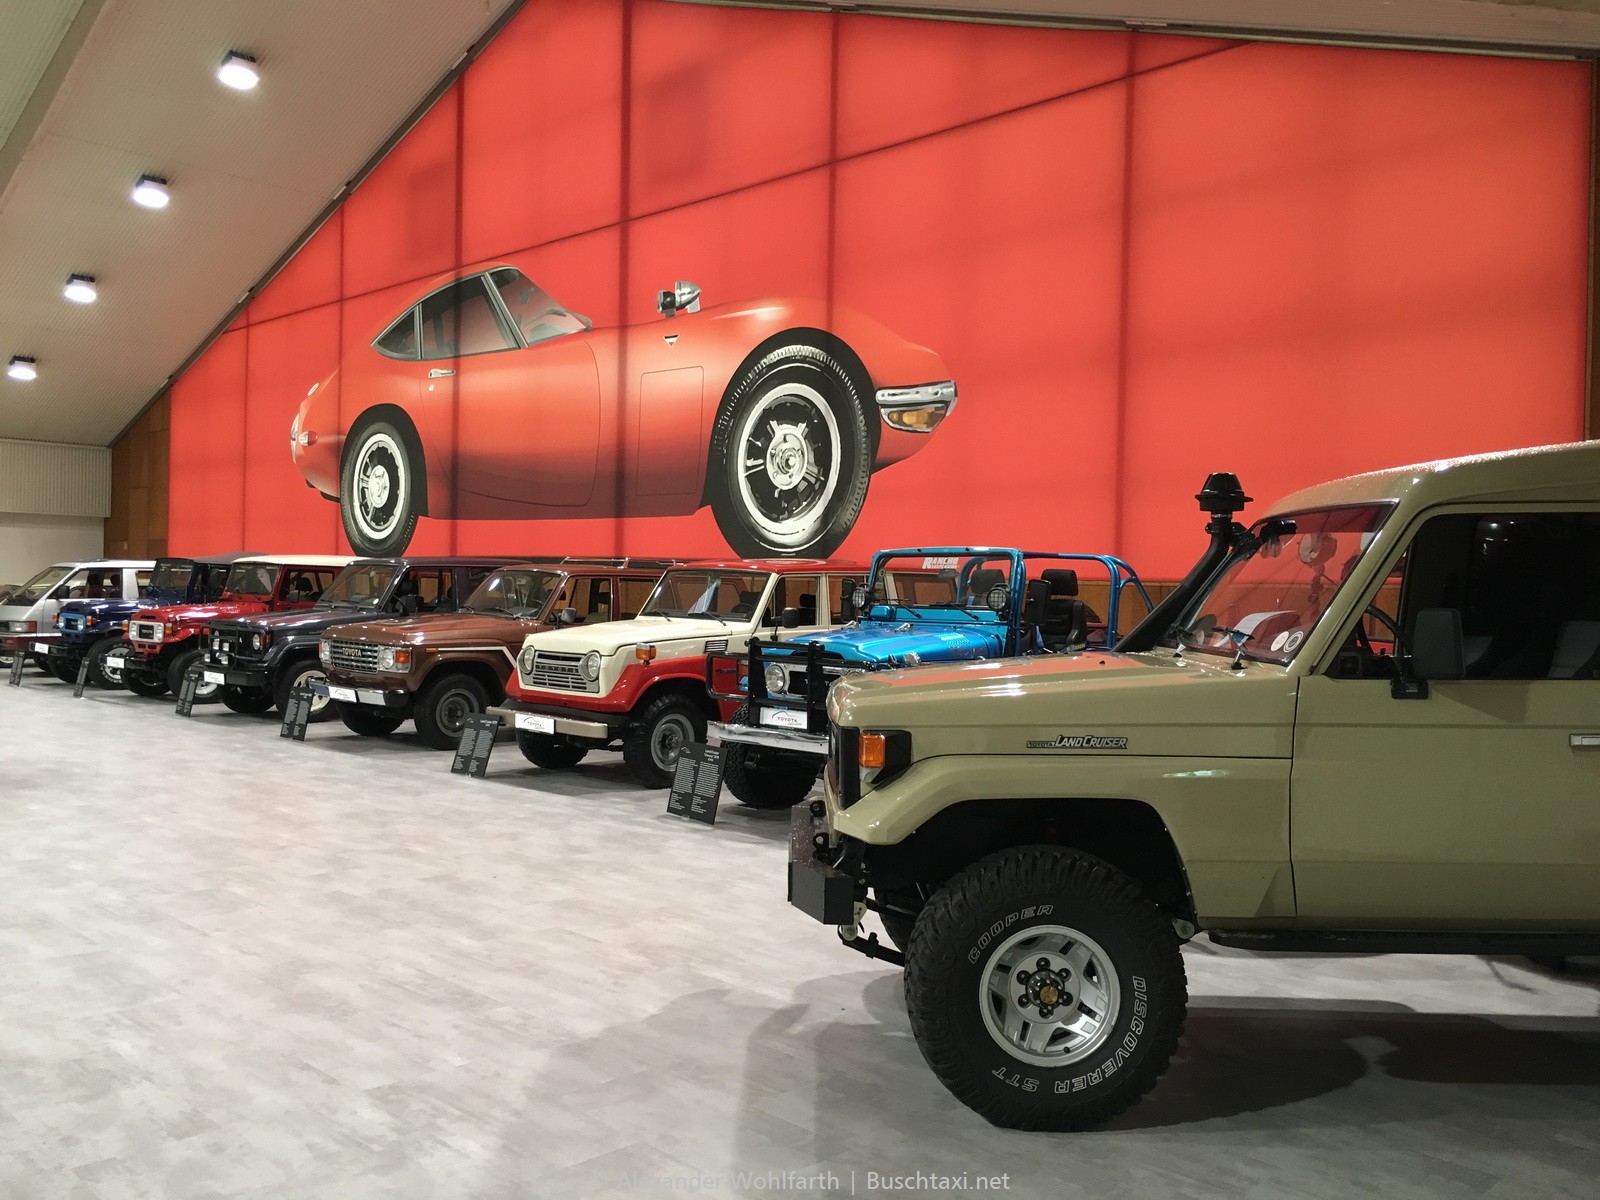 2017-11-23 toyota collection 02